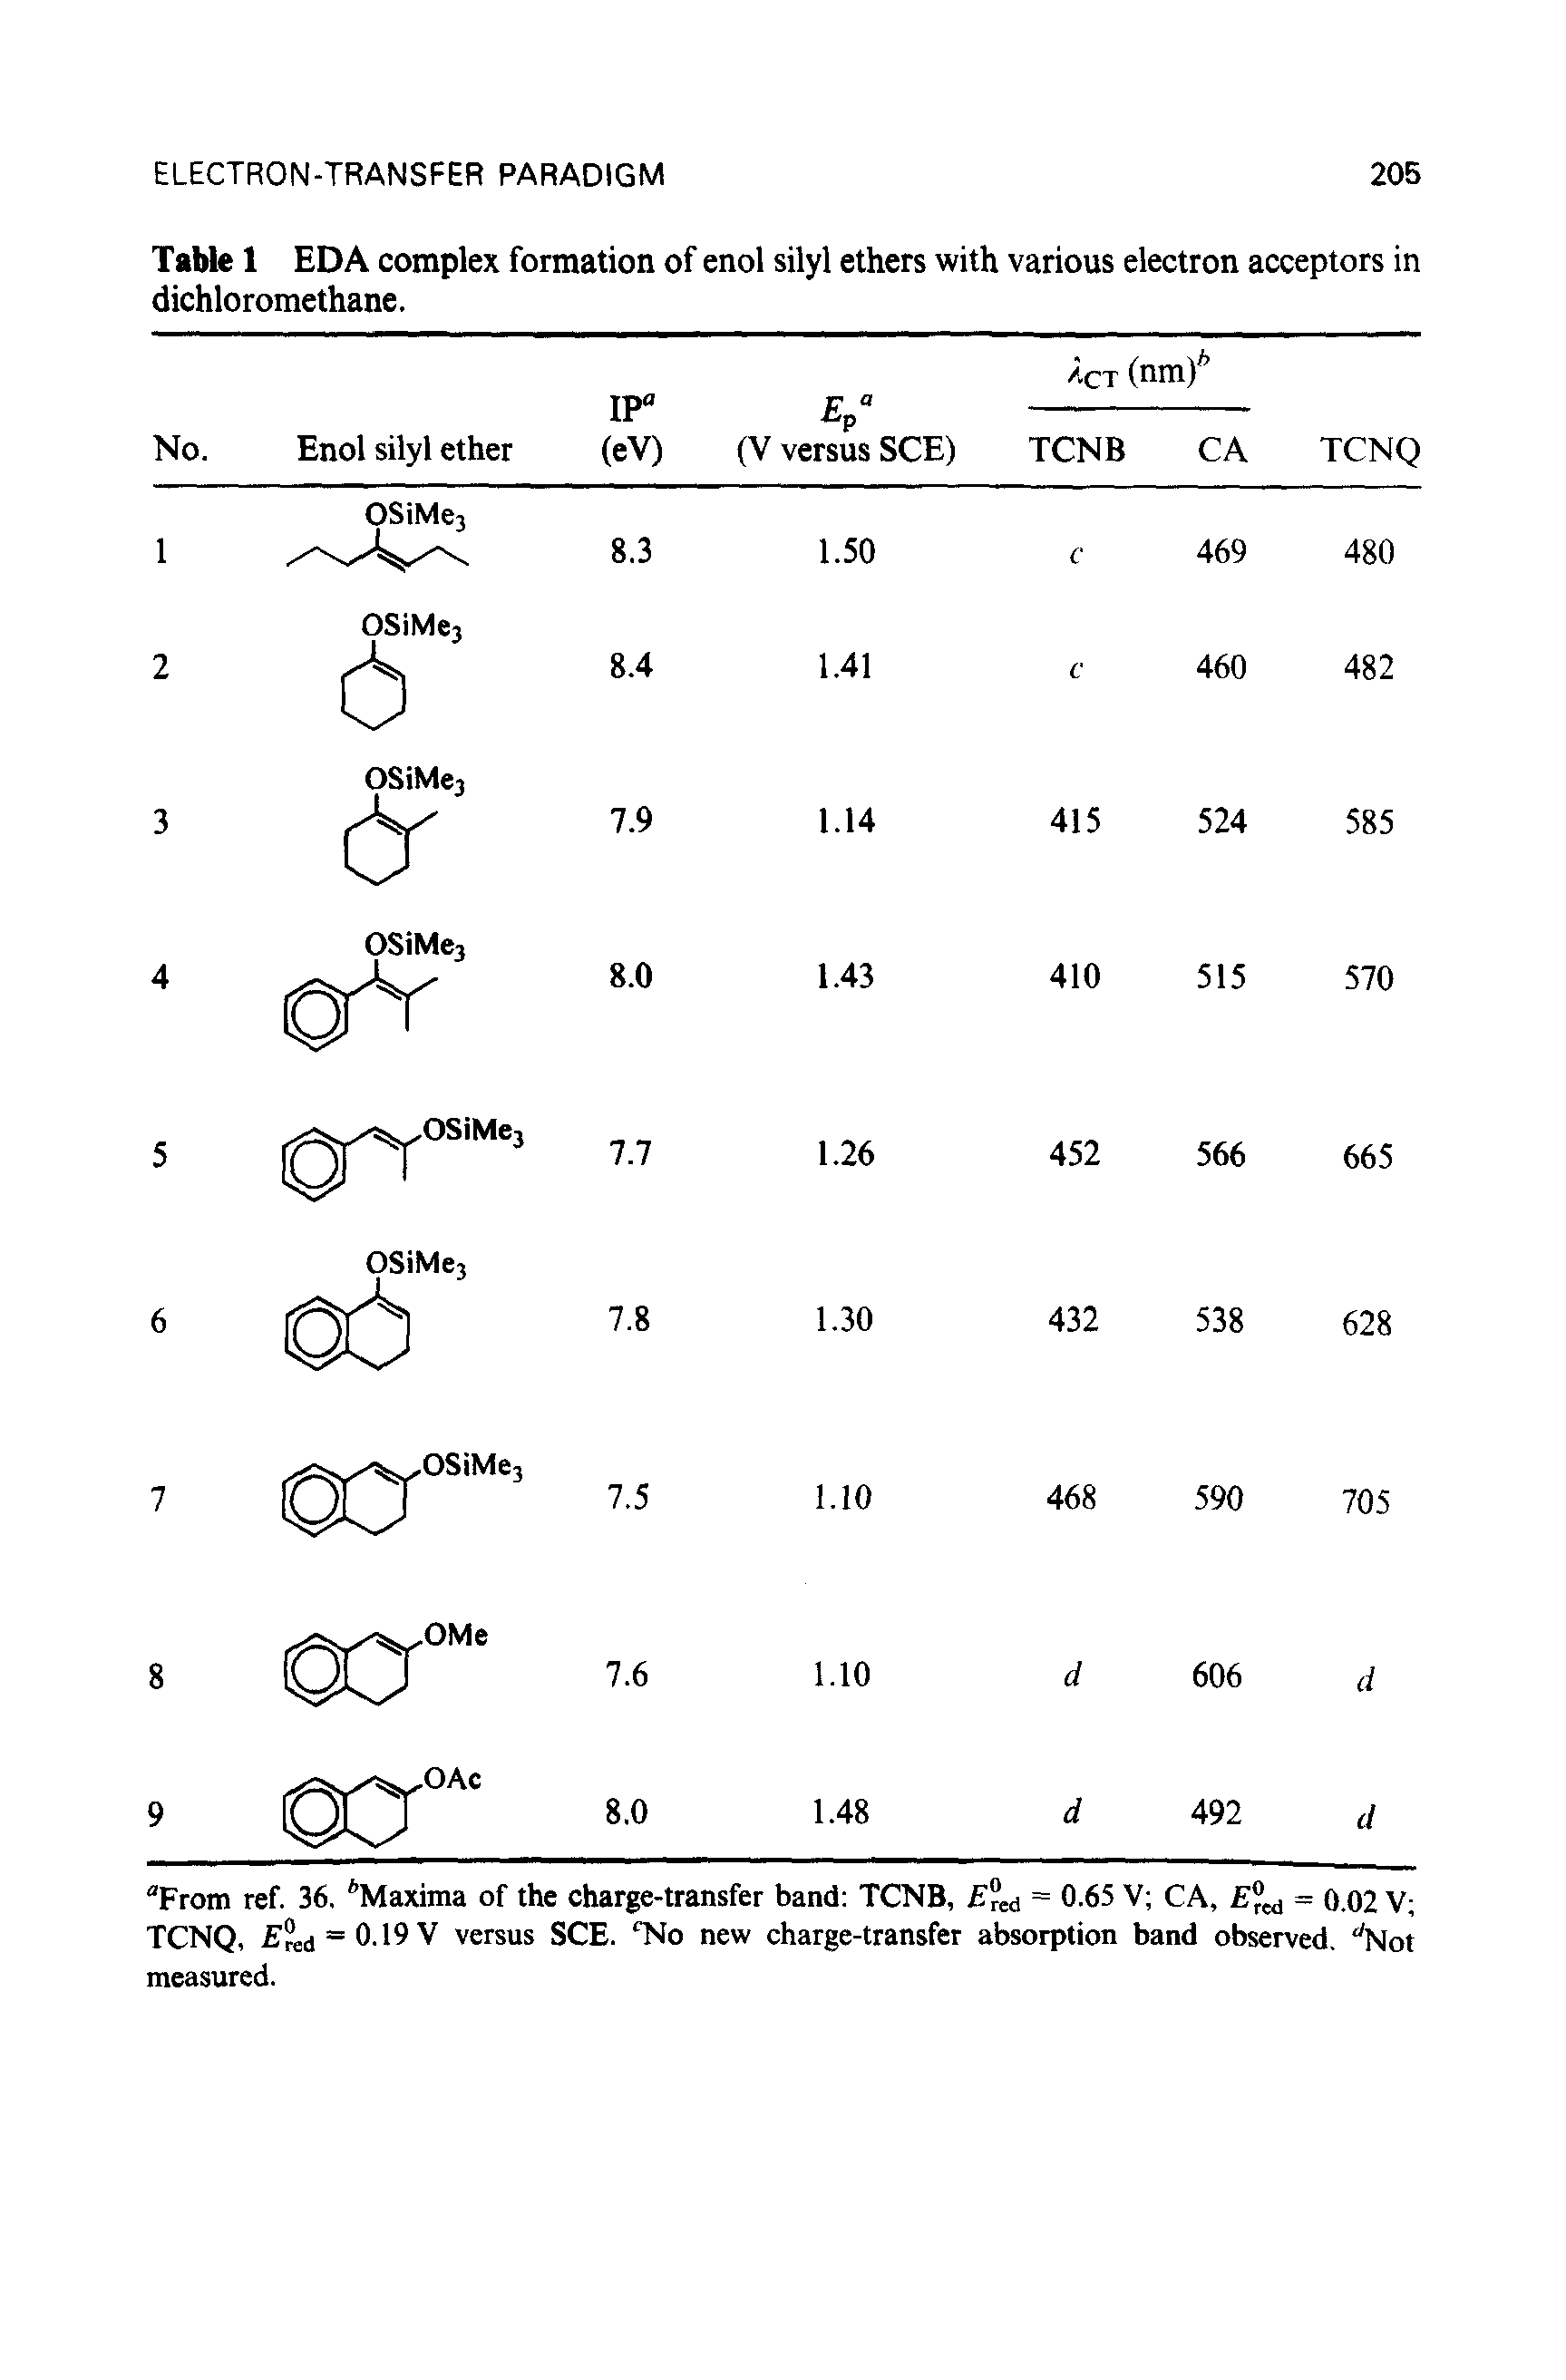 Table 1 EDA complex formation of enol silyl ethers with various electron acceptors in dichloromethane.